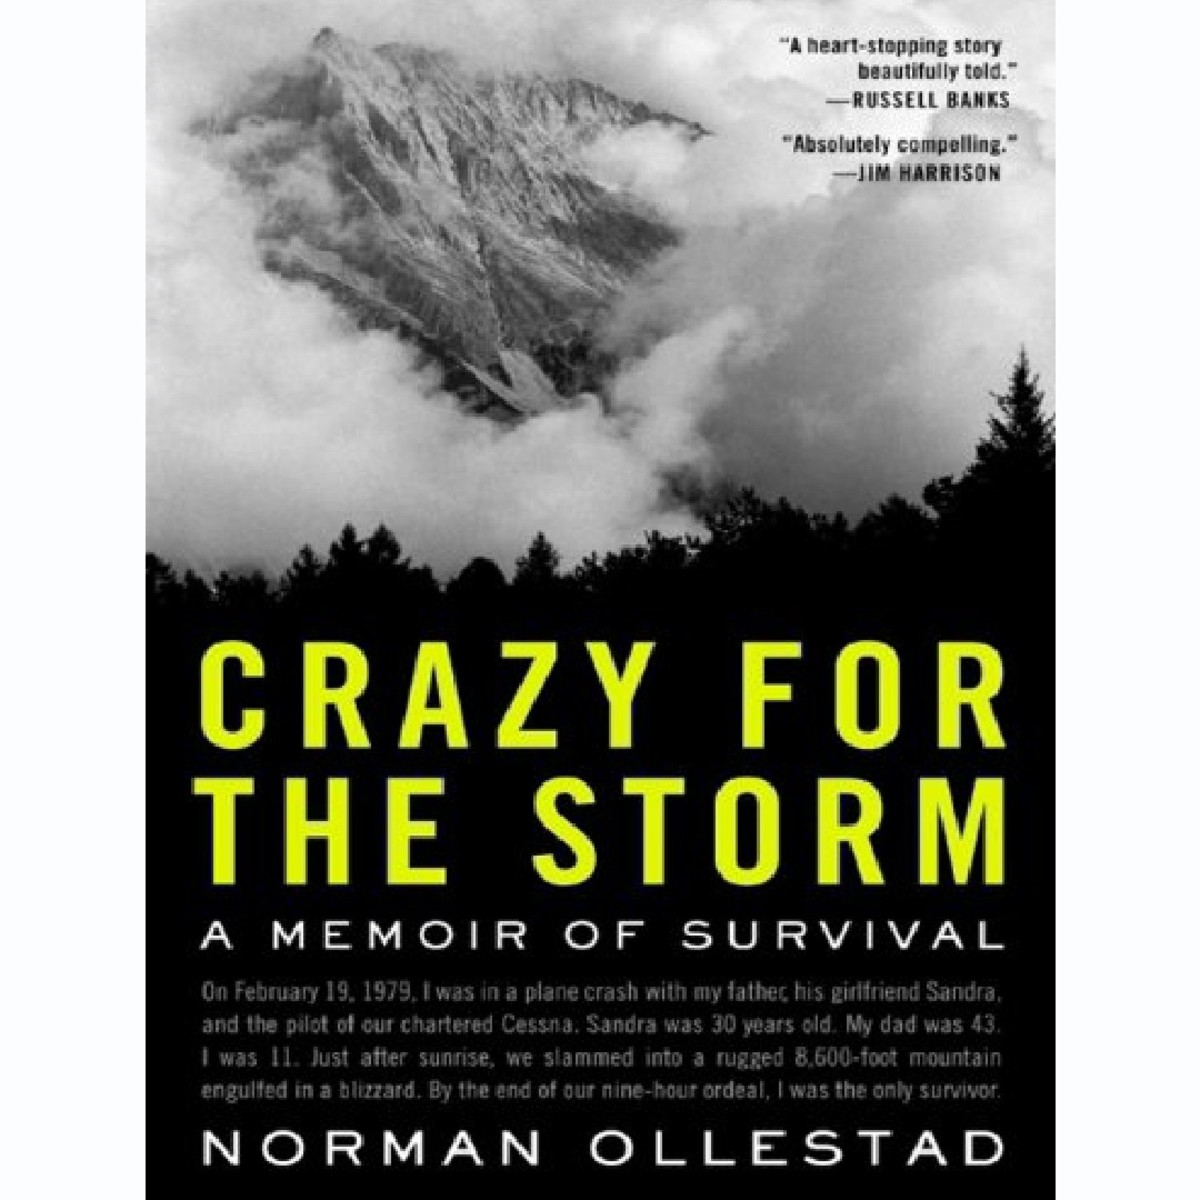 'Crazy for the Storm: A Memoir of Survival' by Norman Ollestad